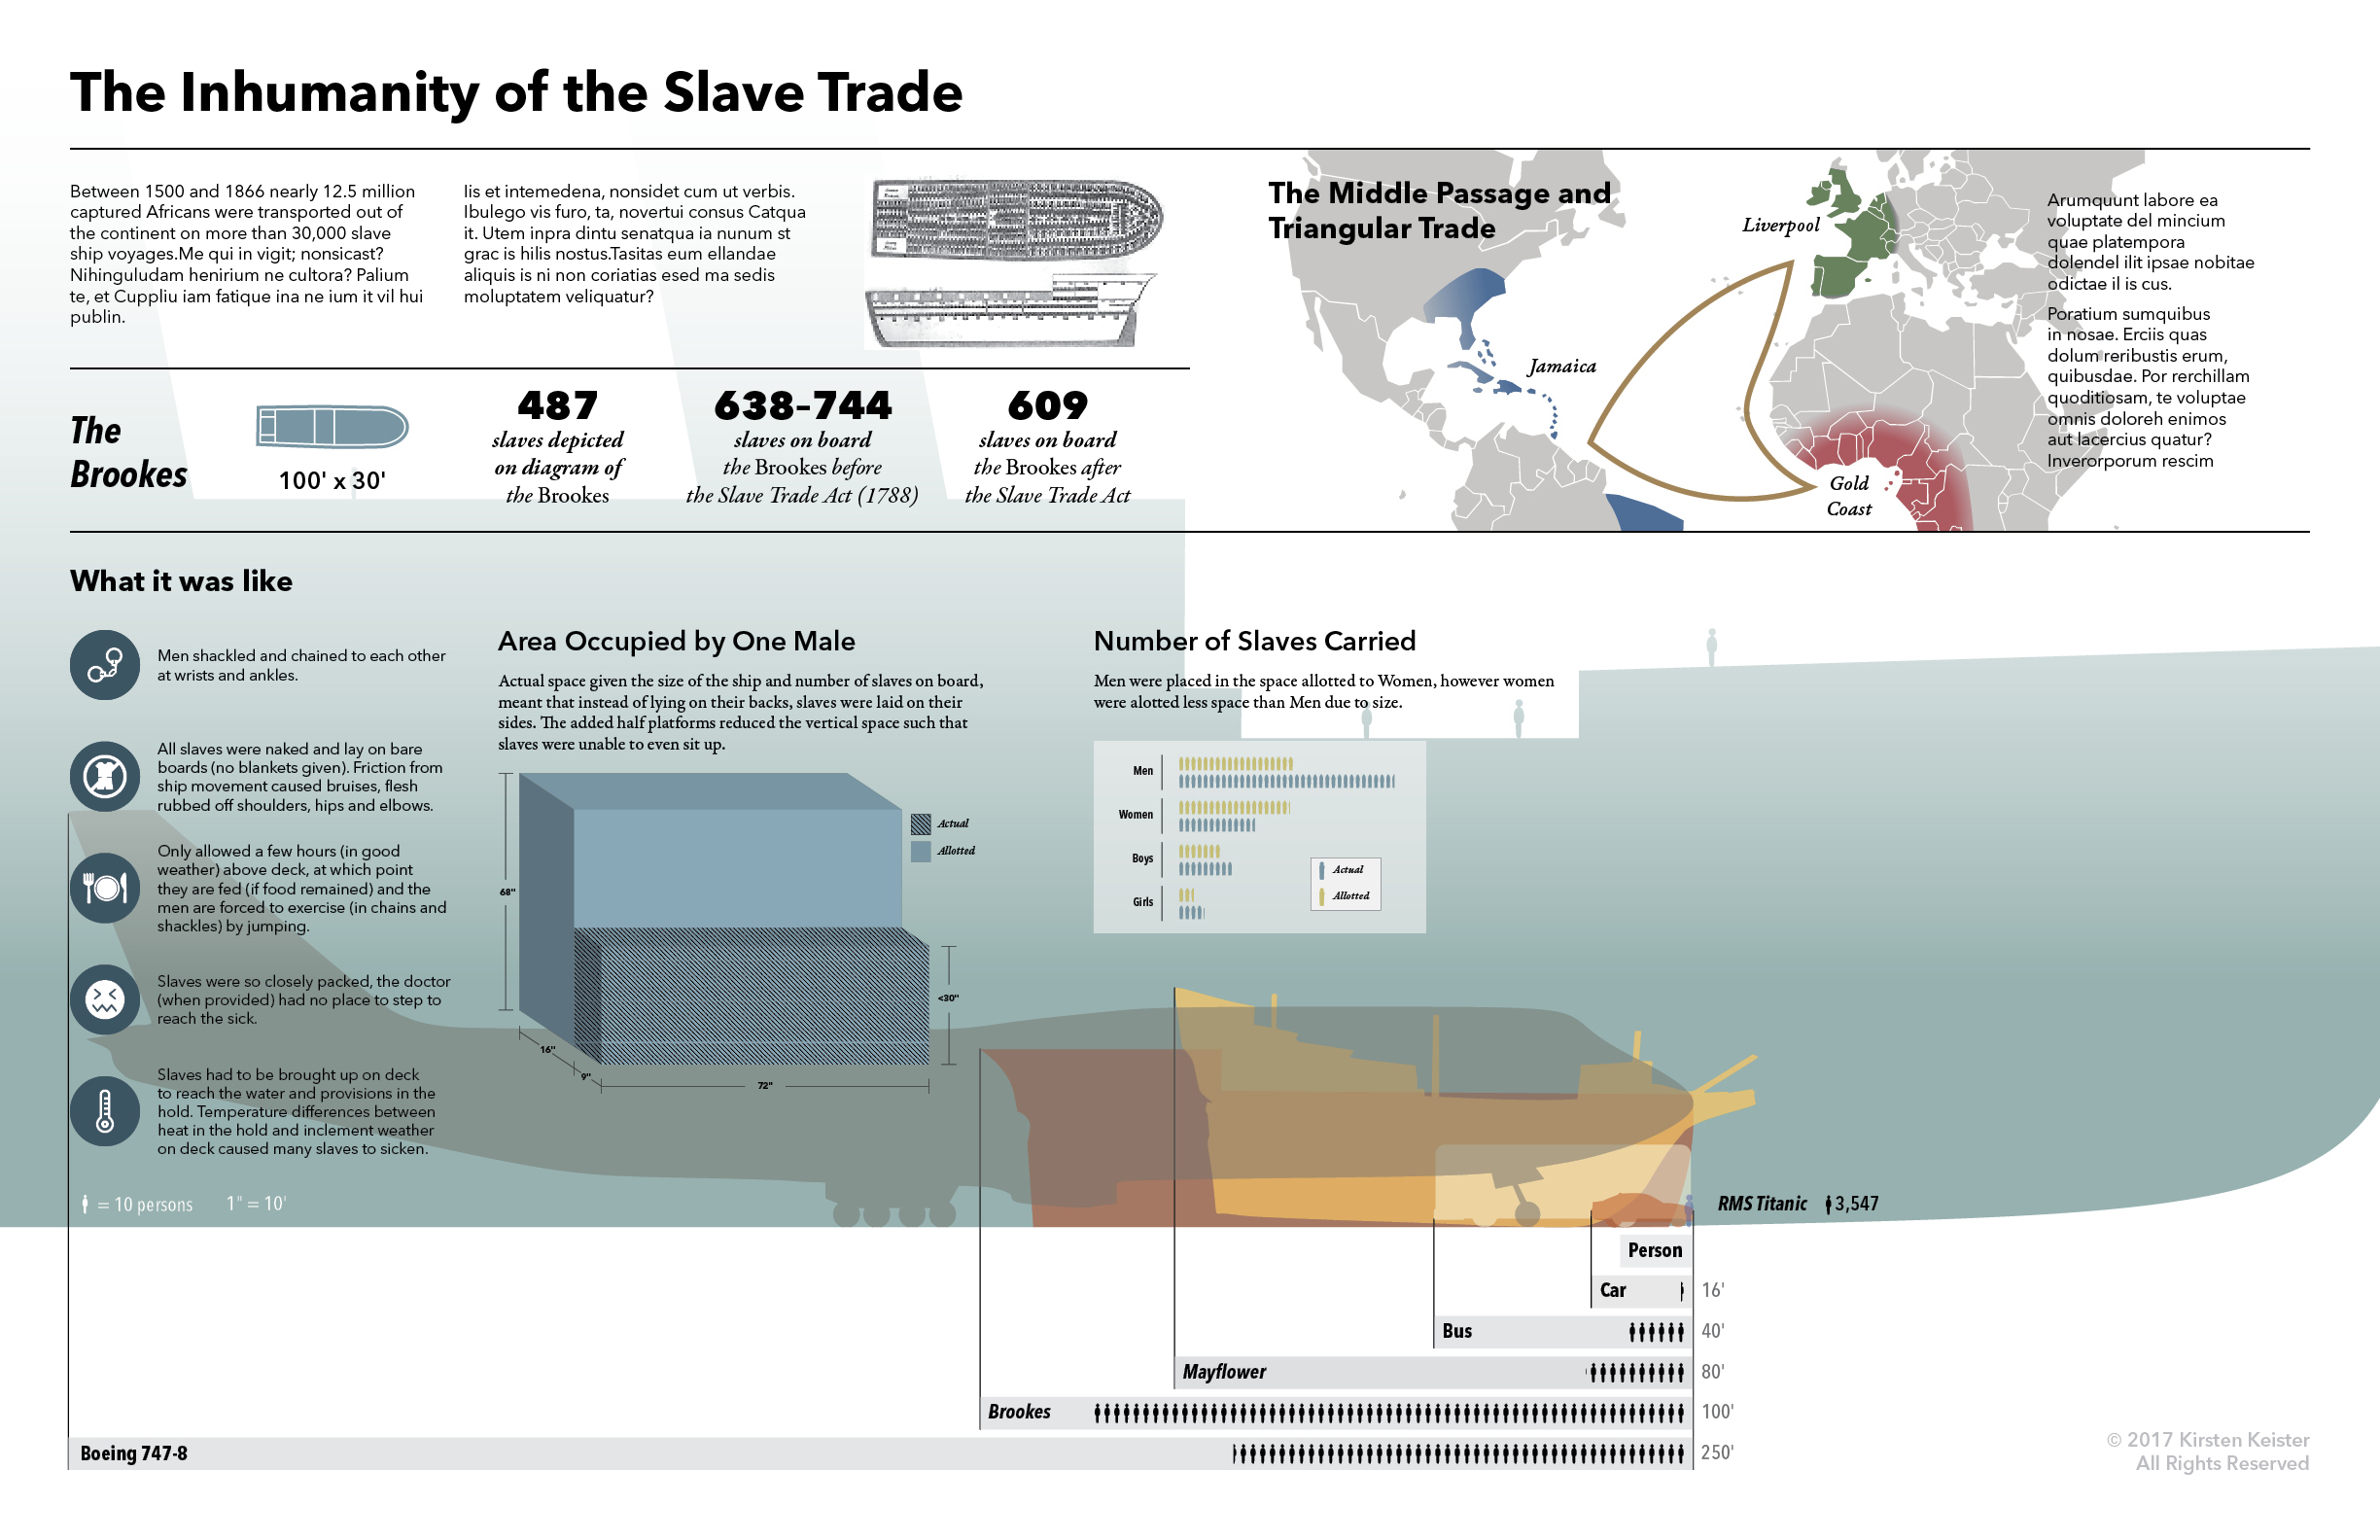 The Inhumanity of the Slave Trade